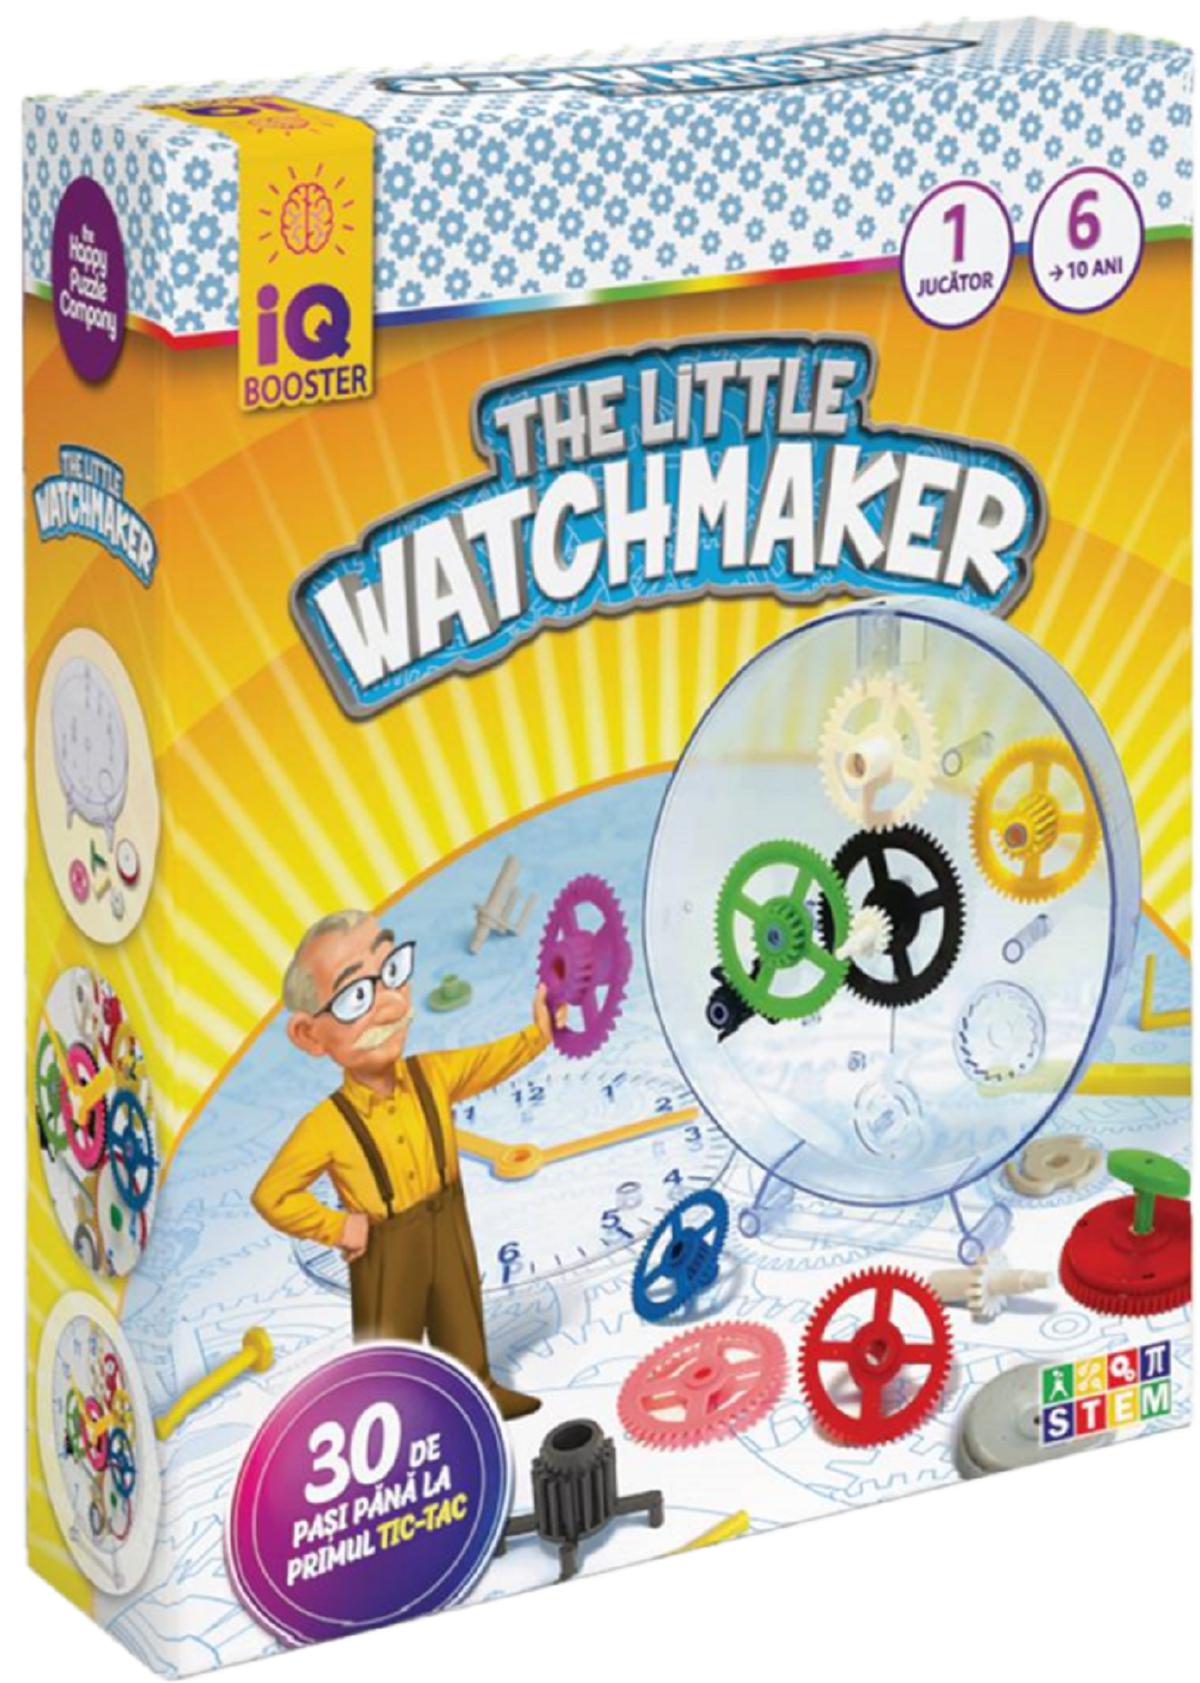 IQ Booster. The Little Watchmaker